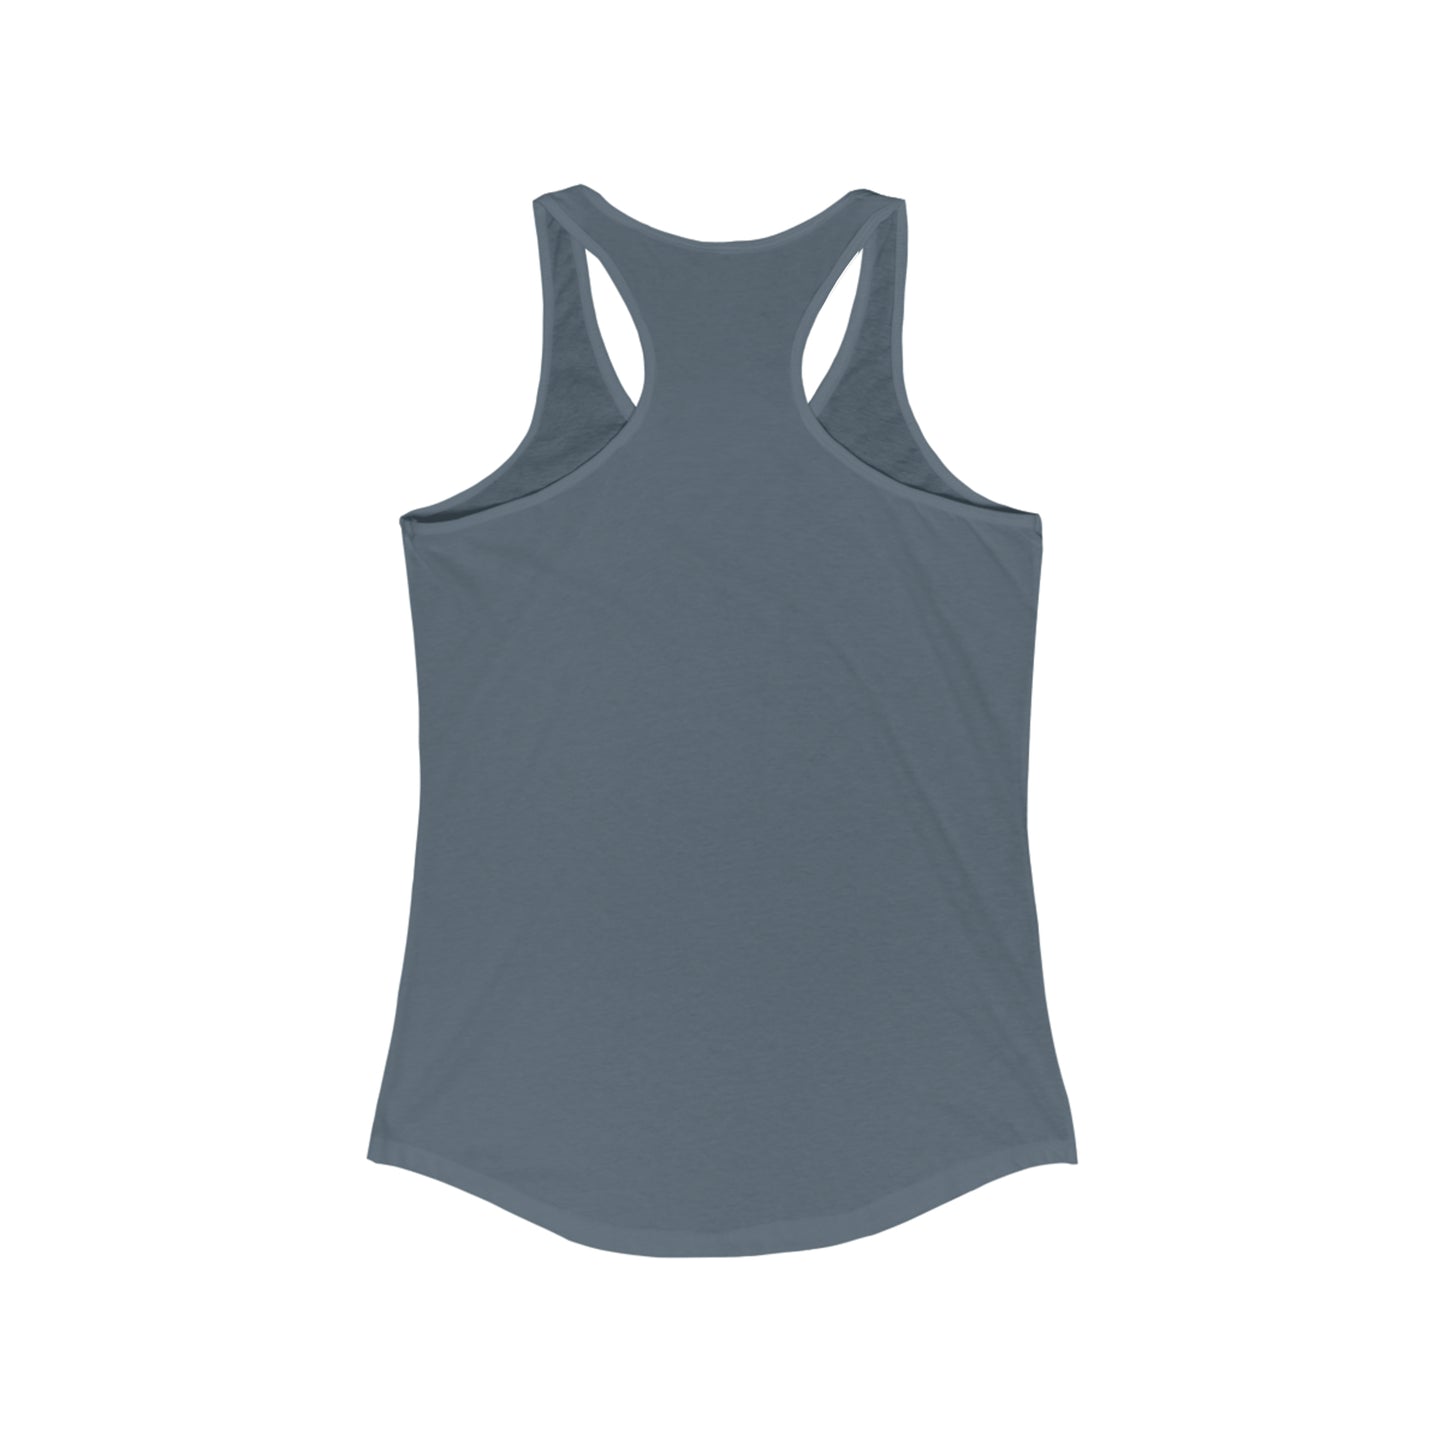 The Way To My Heart - Chestnut - Women's Ideal Racerback Tank